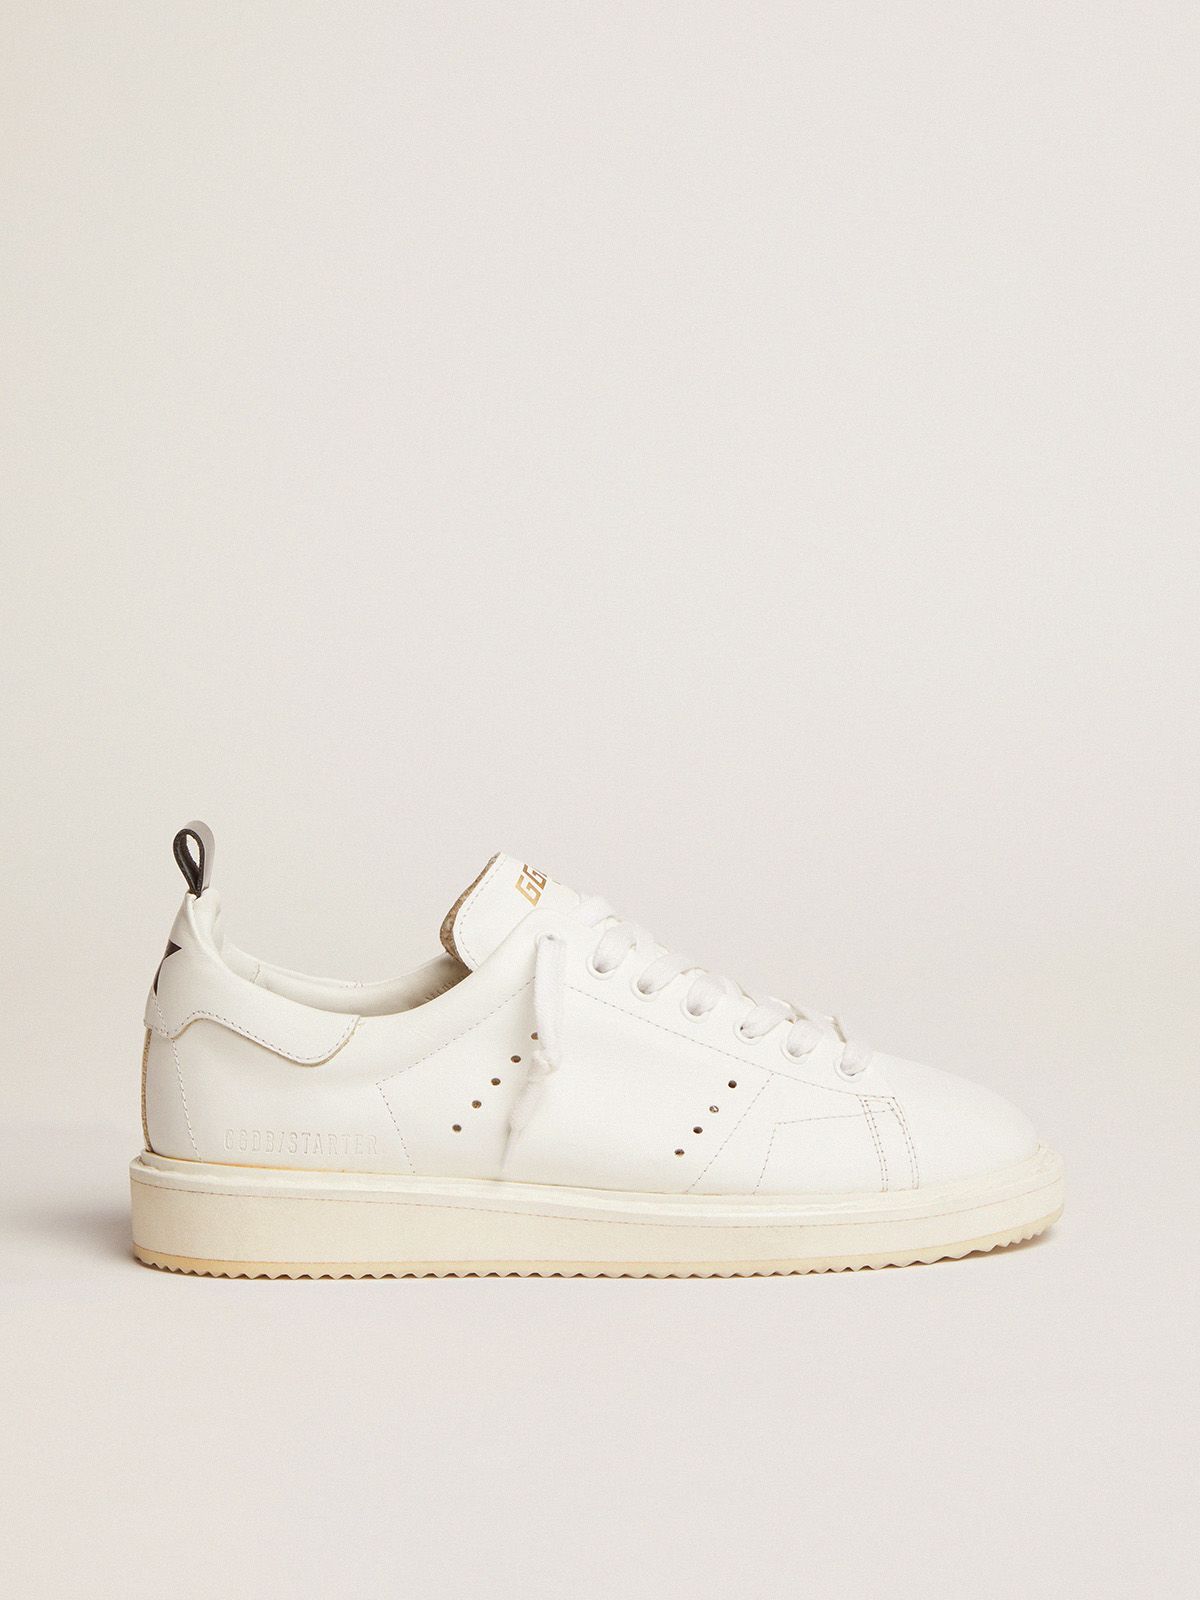 golden goose in Starter total white leather sneakers